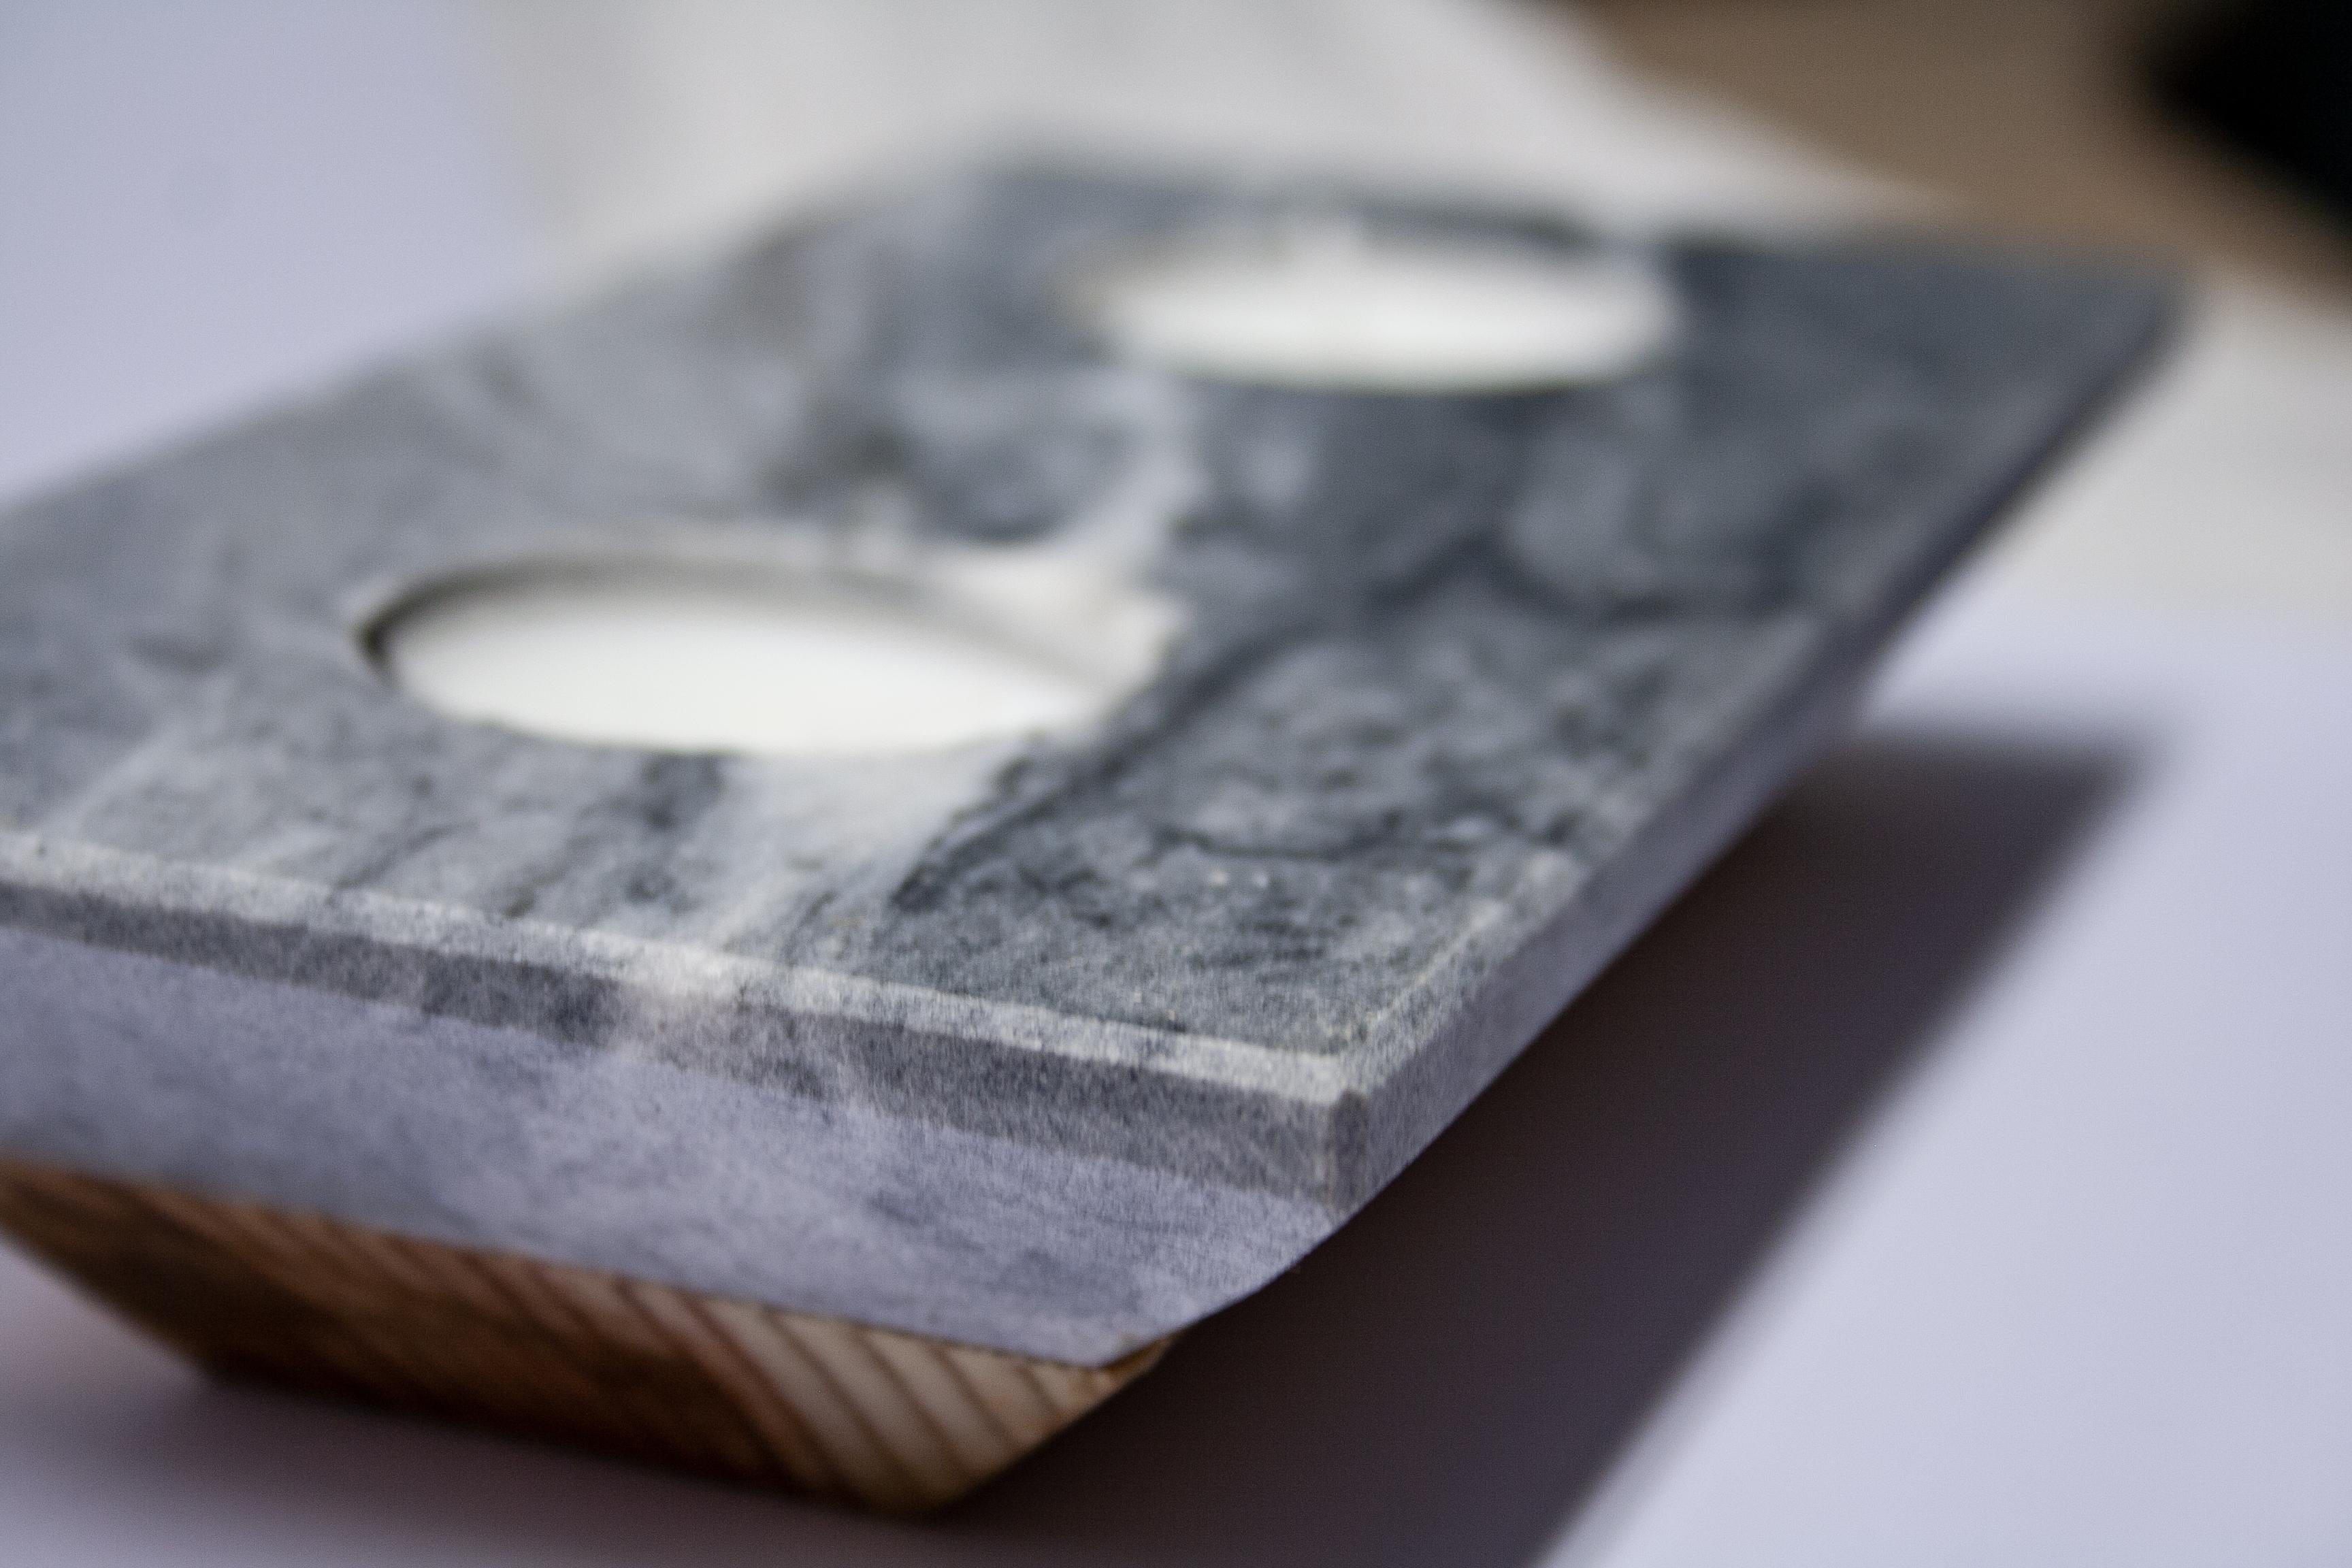 Gray Marble Candle Holder for Two Candles Special Gift Design Mother’s Day Gift.
This small marble decorative object has a unique inverted pyramid shape and holds two candles making it a perfect elegant and sophisticated gift.
Its upper structure is